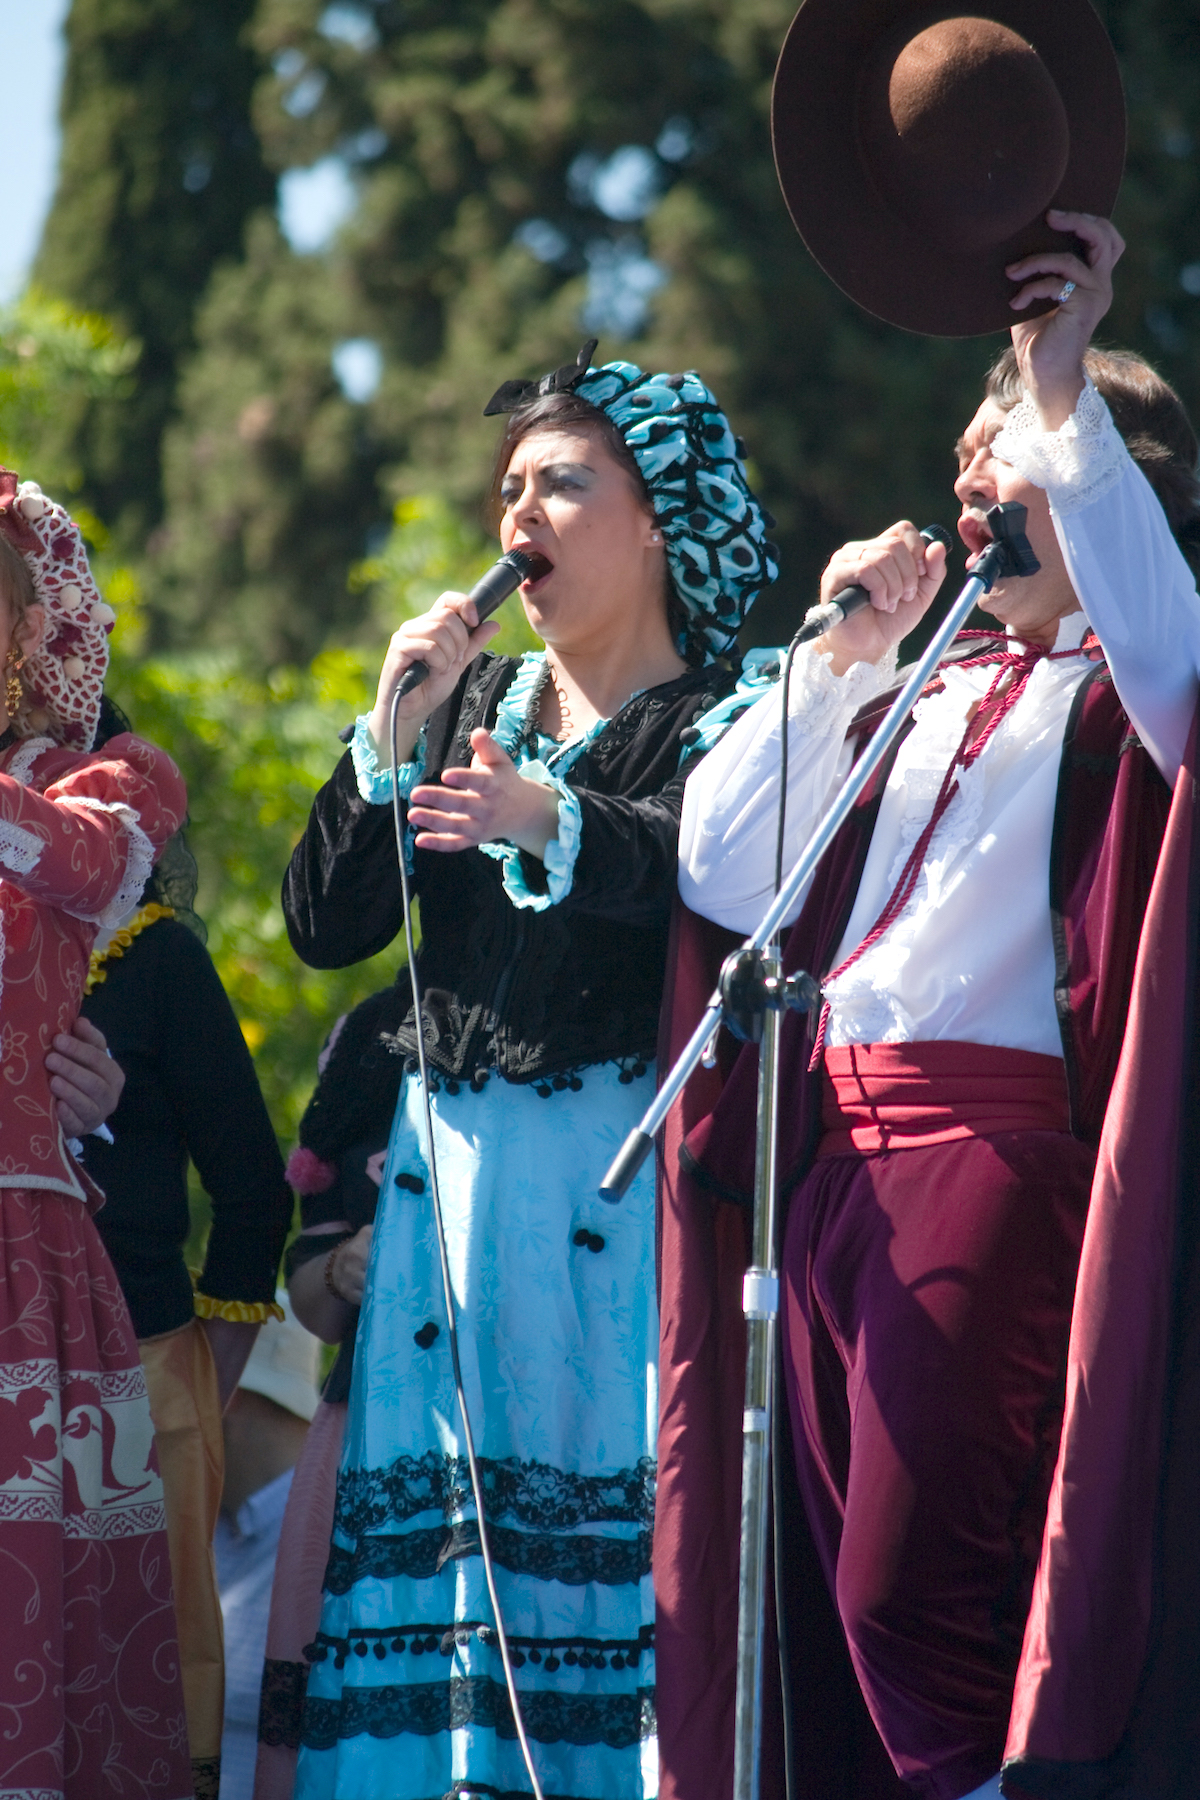 Women and men in traditional costumes holding microphones while performing at the San Isidro Festival in Madrid.